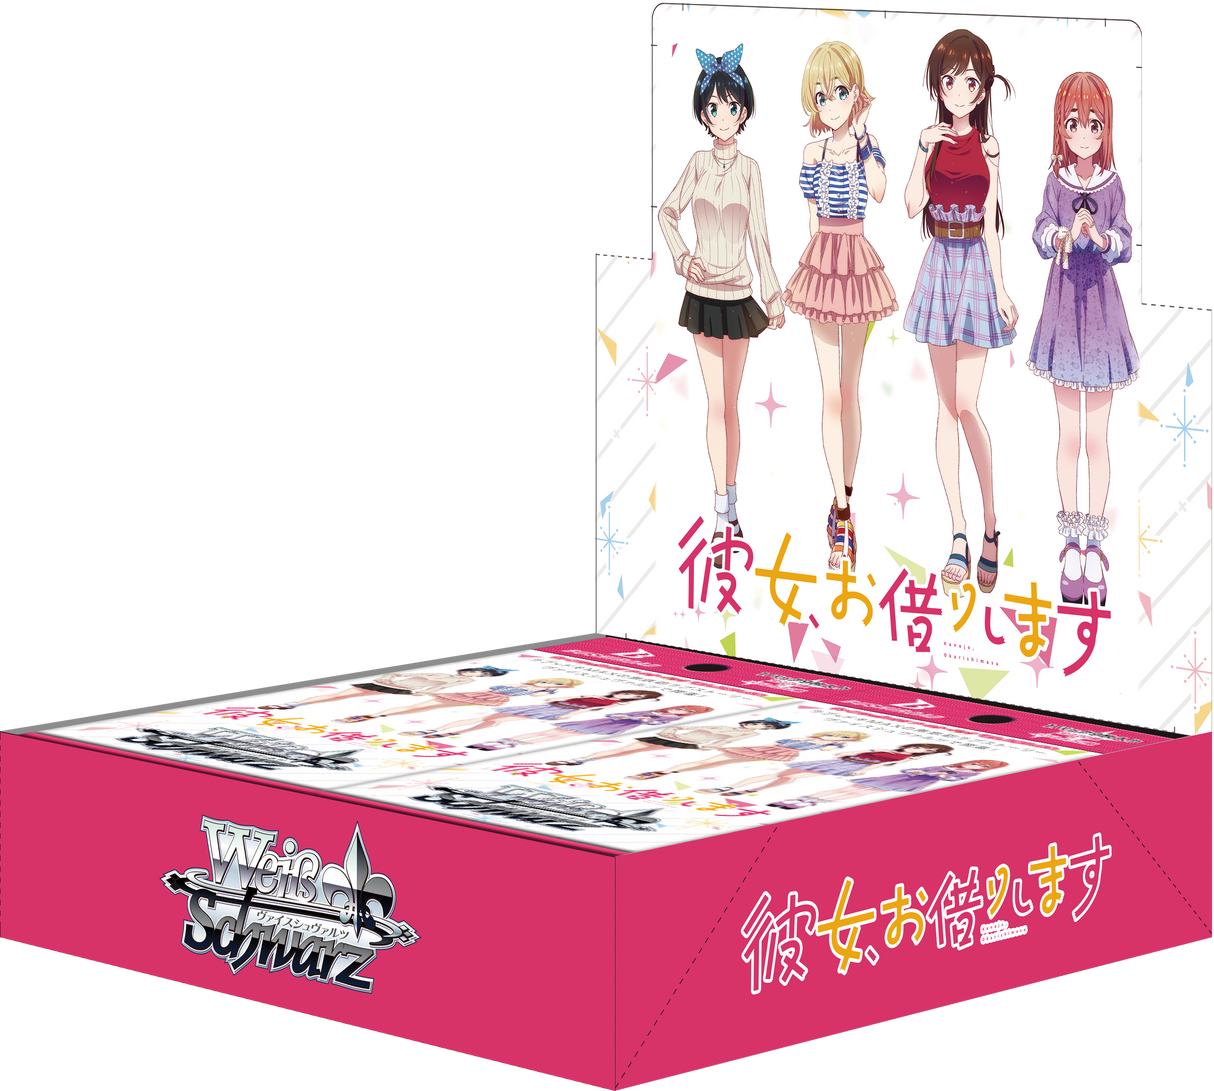 Rent-A-Girlfriend - Weiss Schwarz Card Game - Booster Box, Franchise: Rent-A-Girlfriend, Brand: Weiss Schwarz, Release Date: 2021-01-22, Type: Trading Cards, Cards per Pack: 9 cards, Packs per Box: 16 packs, Nippon Figures